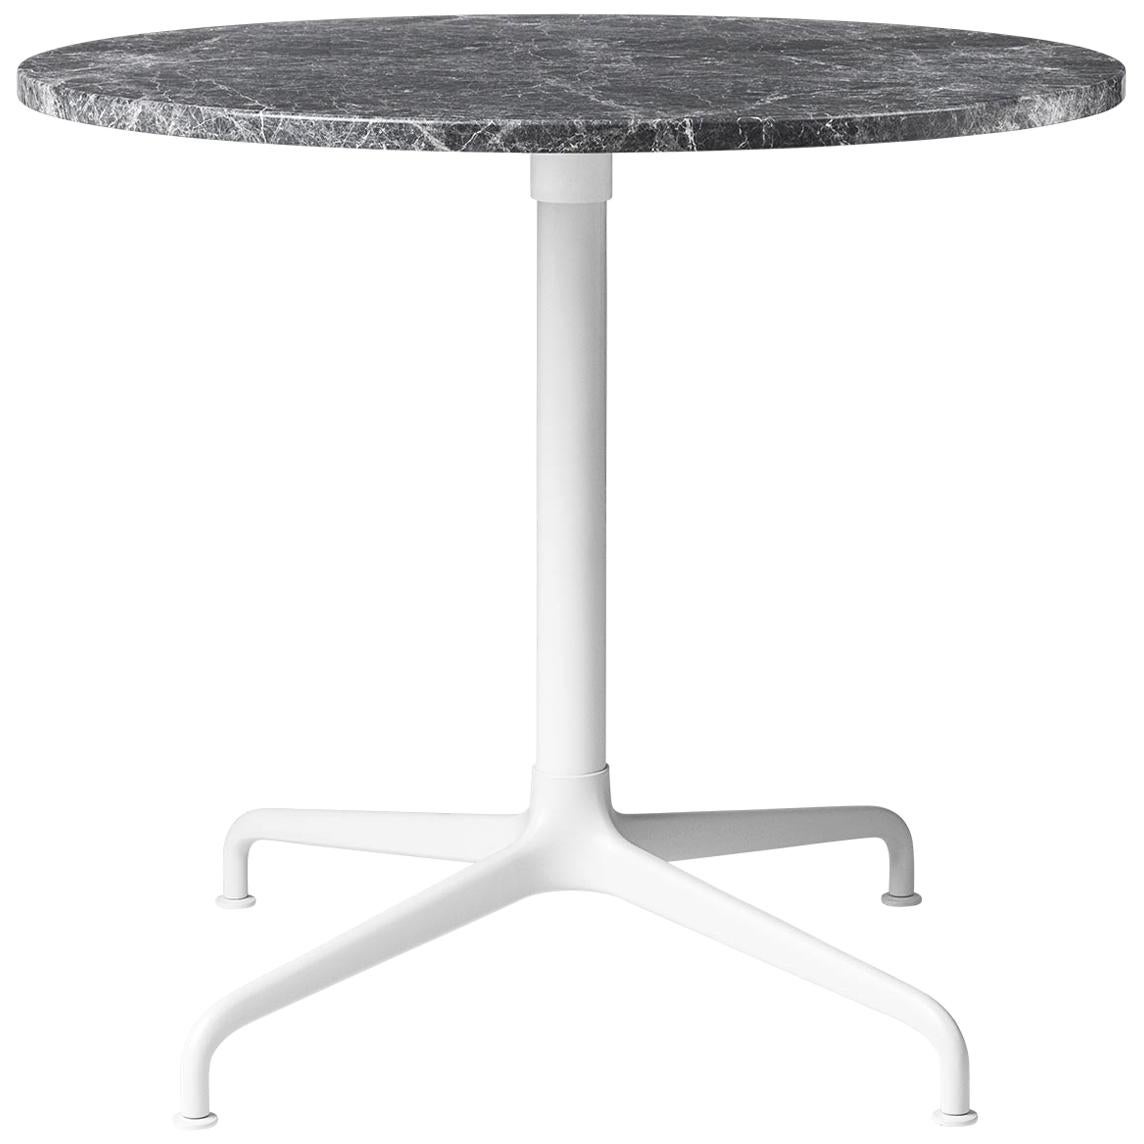 Beetle Lounge Table, Round, 4 Star Base, Medium, Marble For Sale